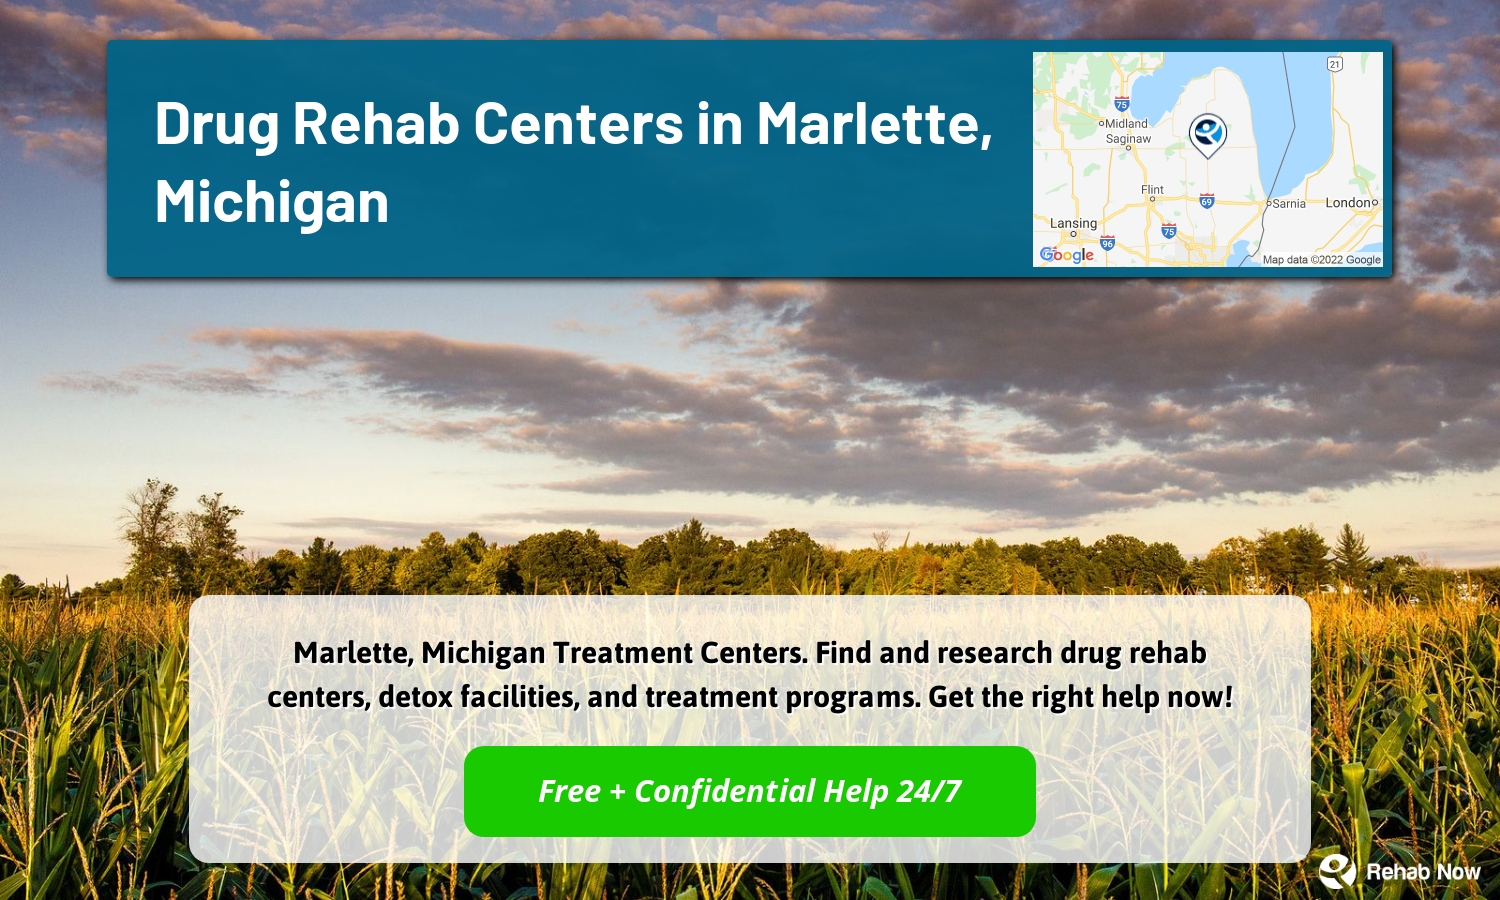 Marlette, Michigan Treatment Centers. Find and research drug rehab centers, detox facilities, and treatment programs. Get the right help now!